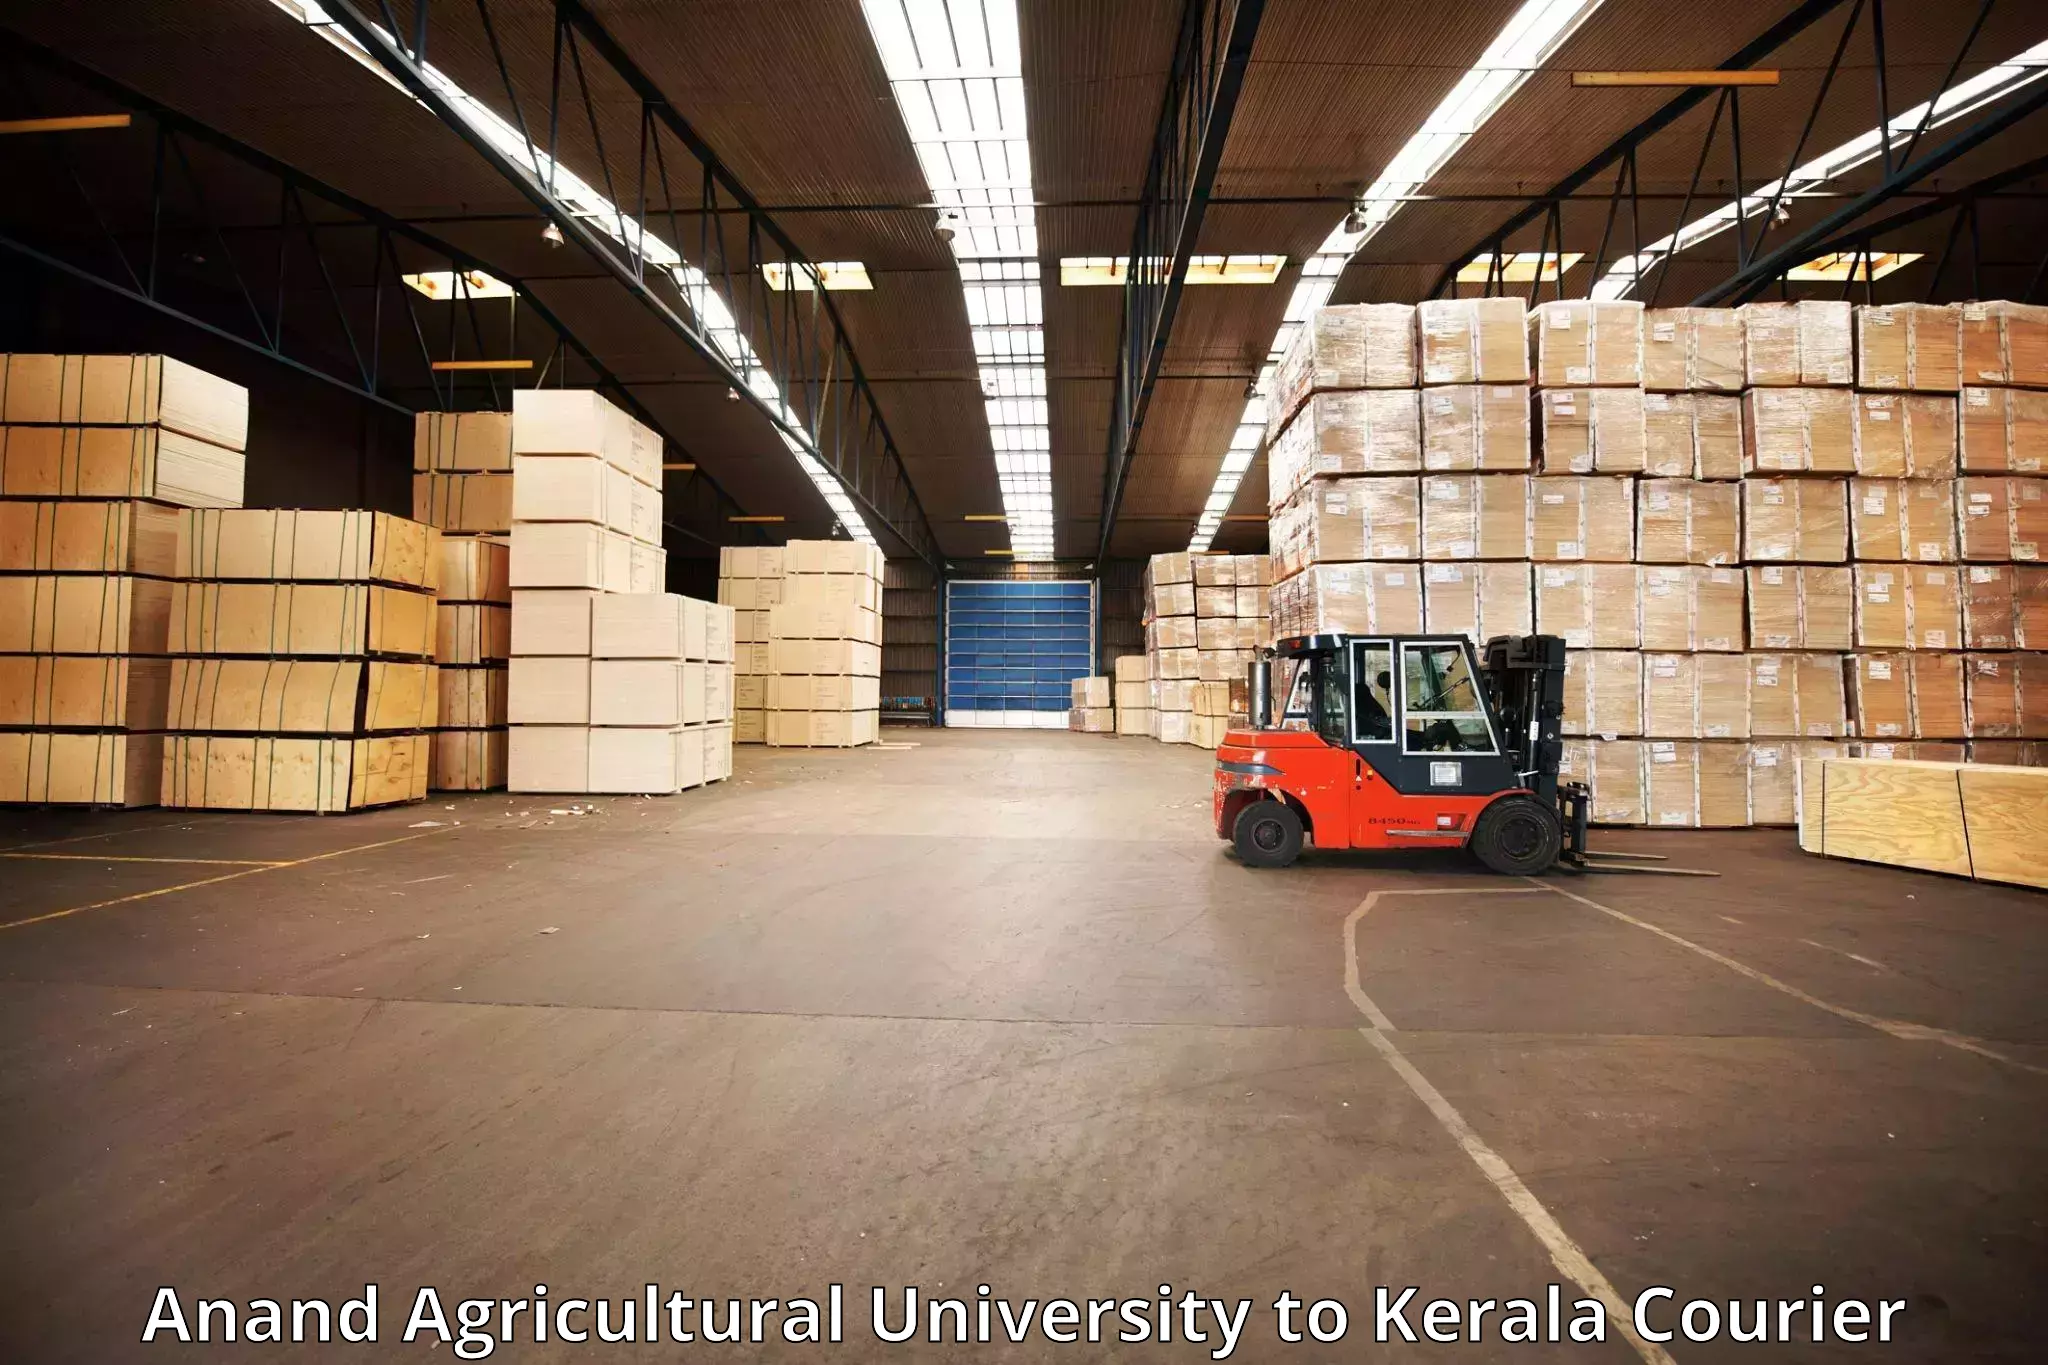 Luggage transfer service Anand Agricultural University to Kerala